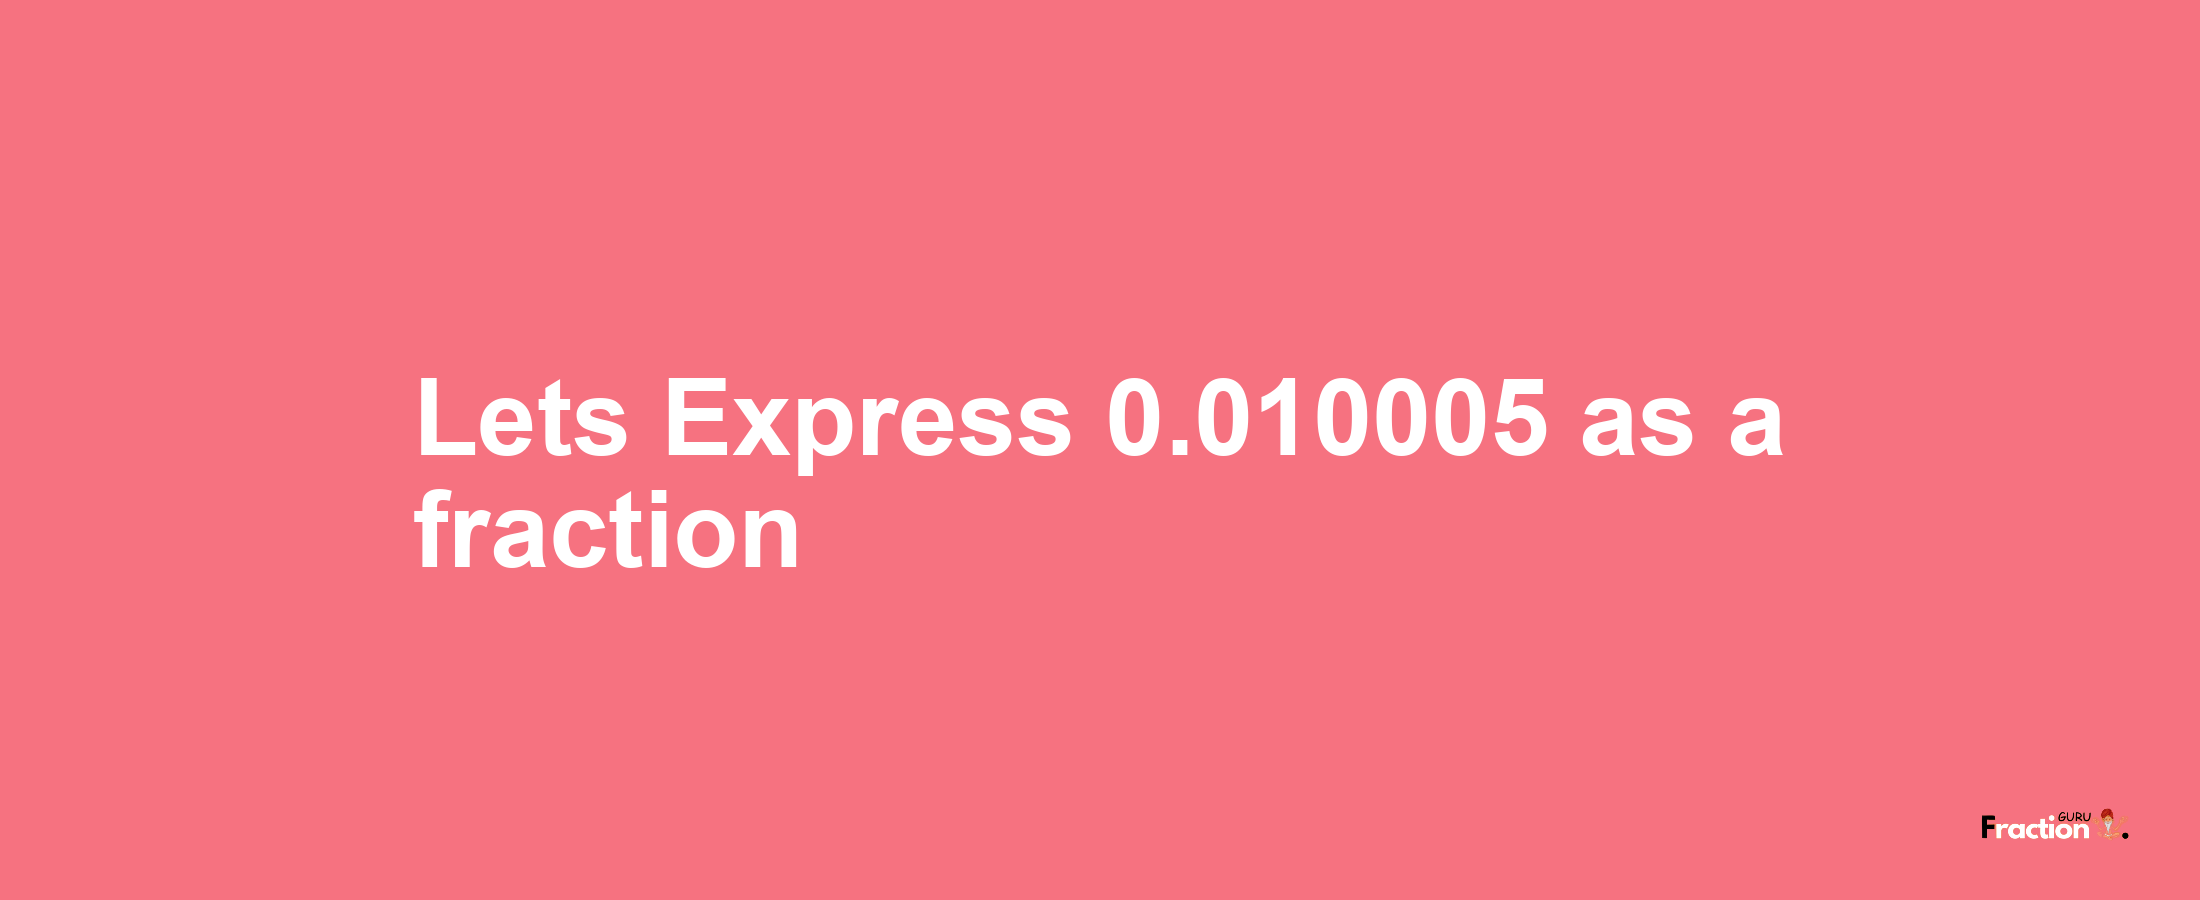 Lets Express 0.010005 as afraction